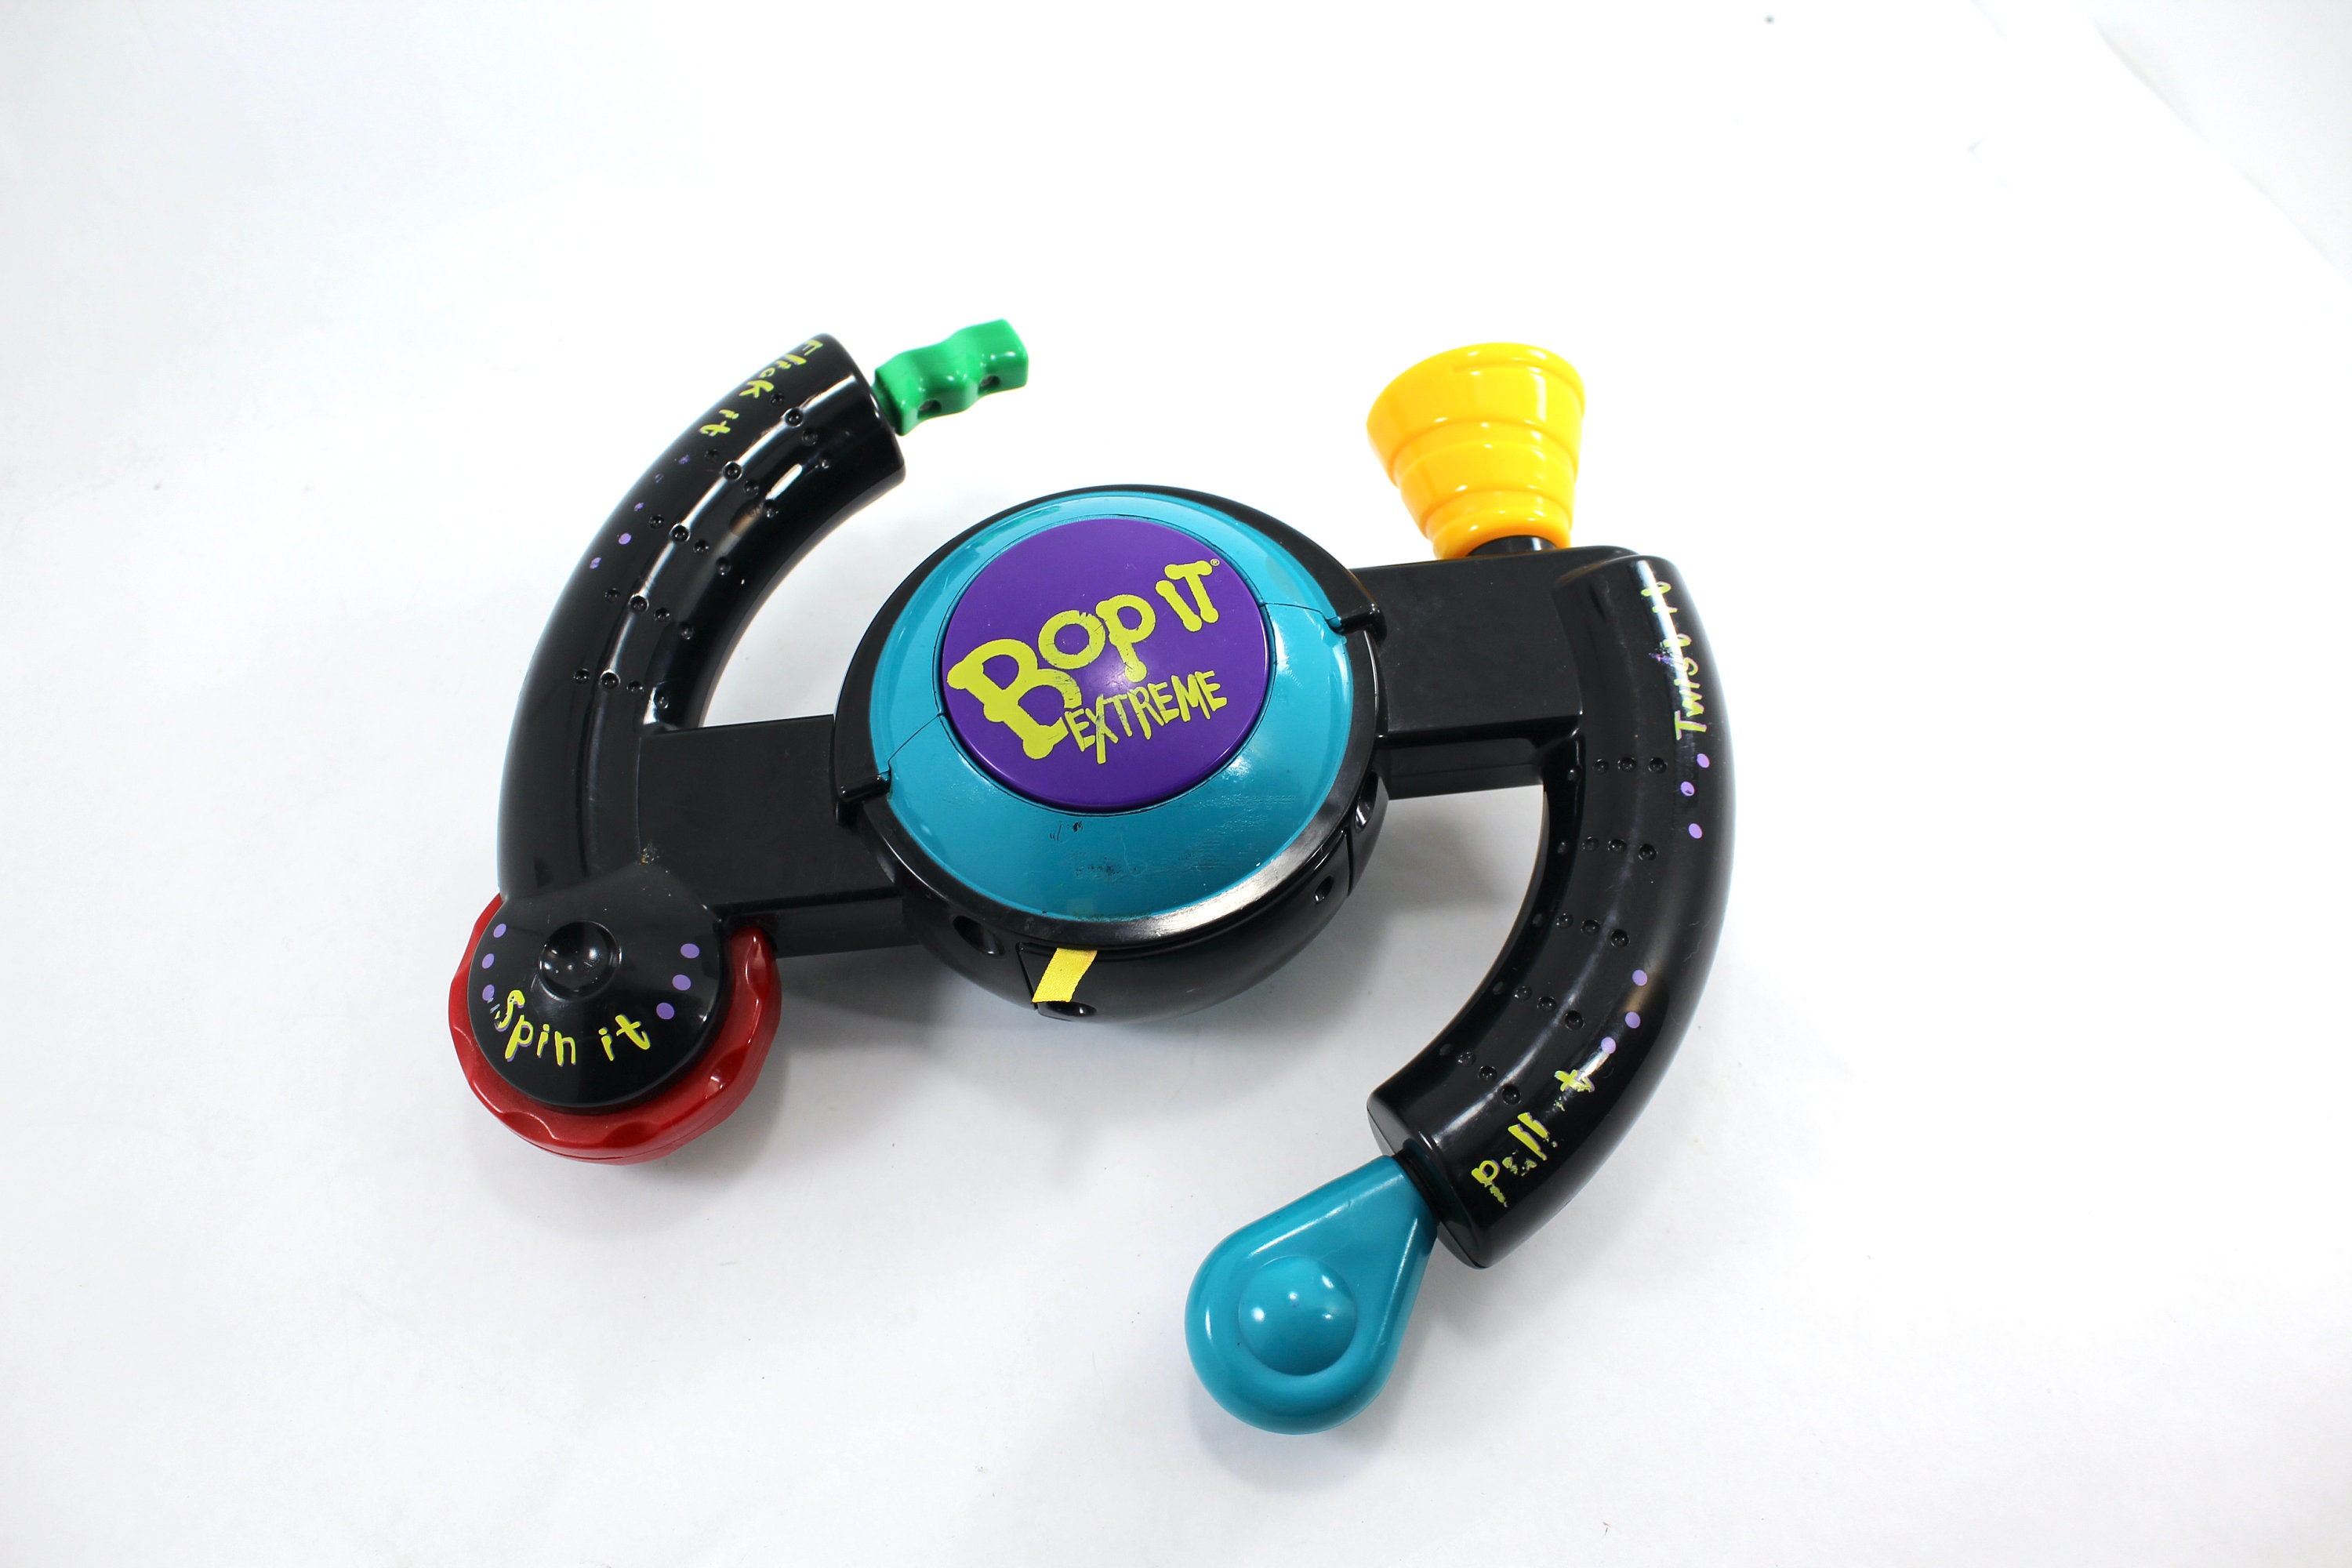 Vintage Bop It Extreme Push and Pull Game by Hasbro 1990s Toy 